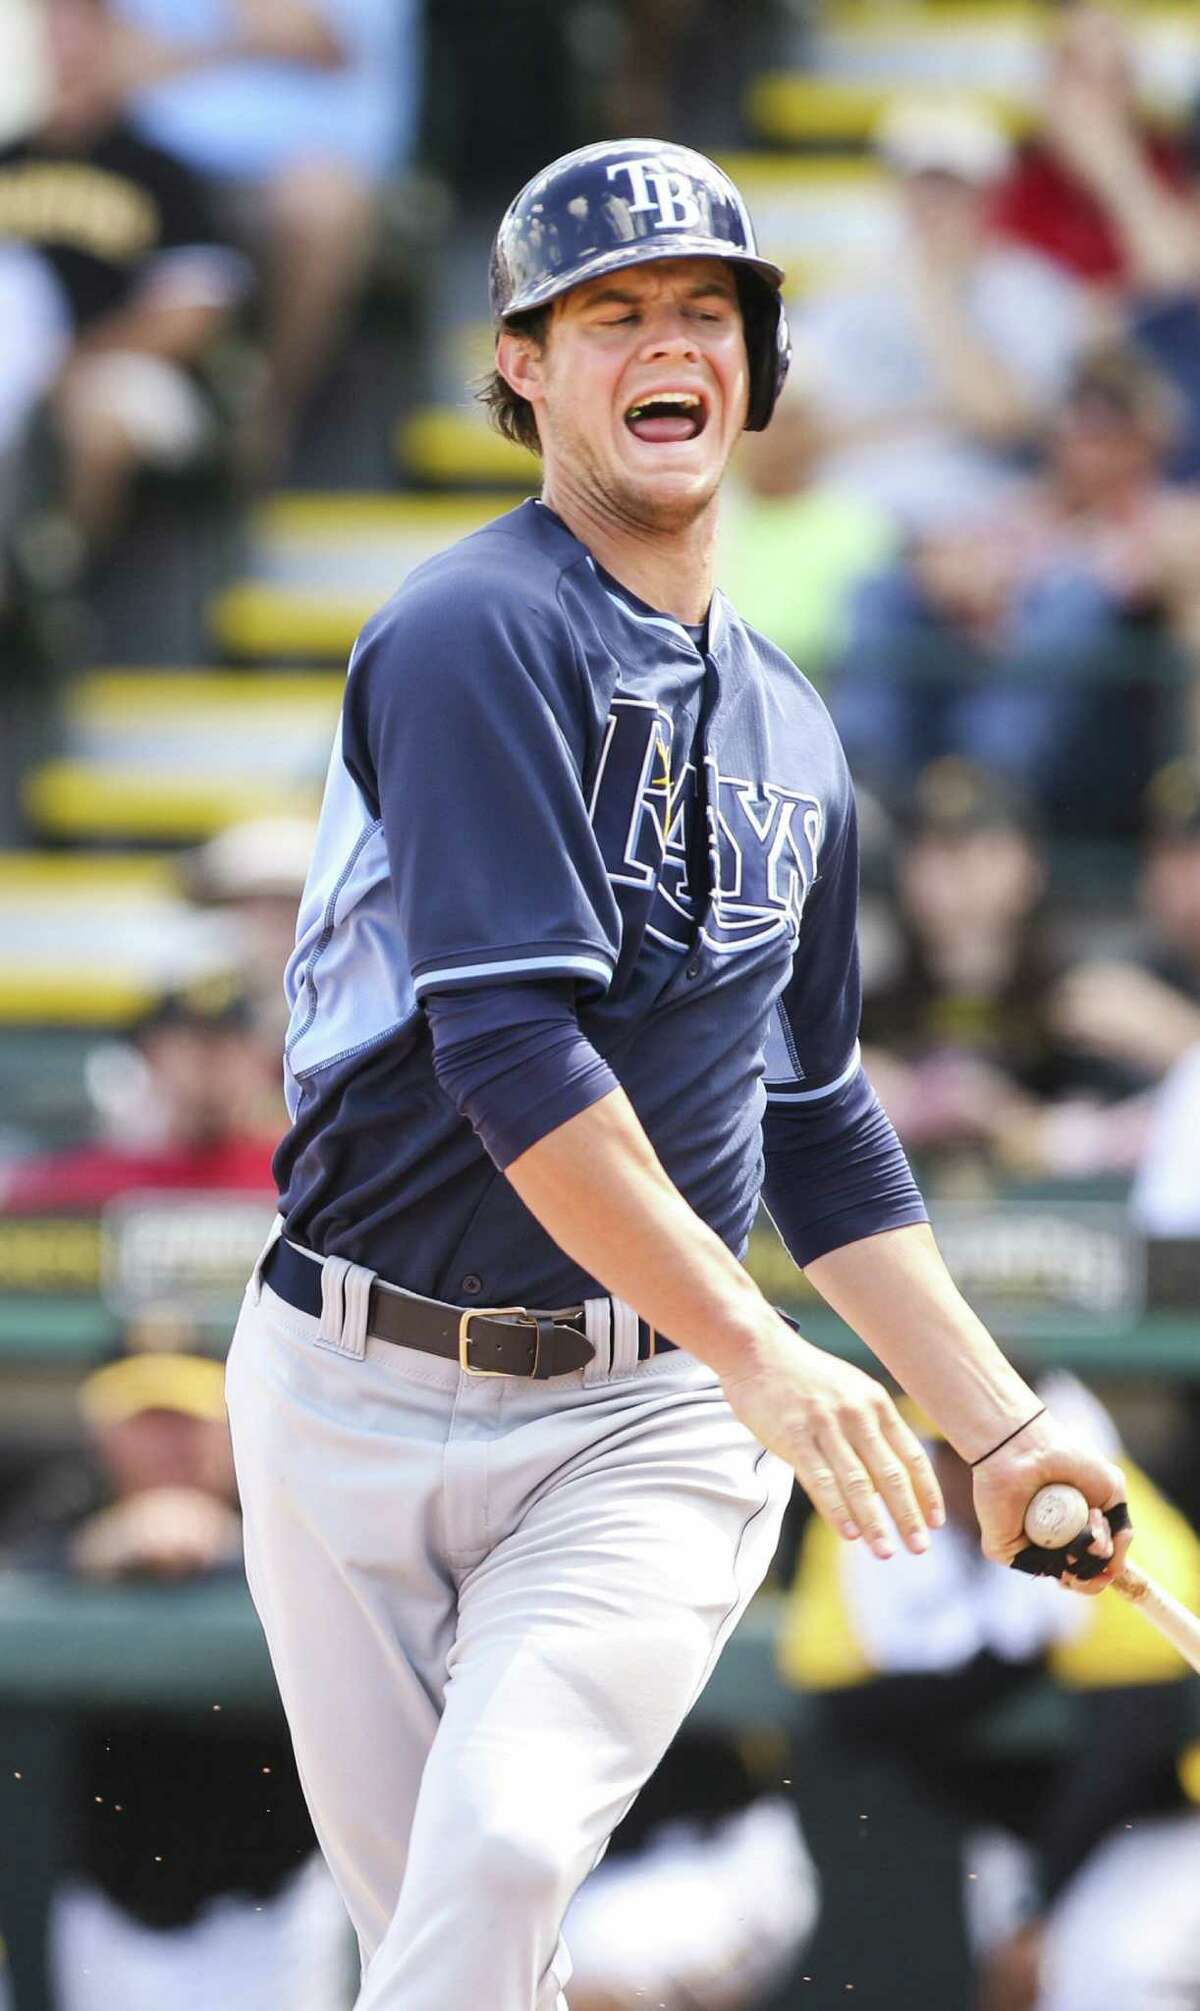 Tampa Bay right fielder Wil Myers winces in pain after hitting a foul ball into his right leg in the third inning against Pittsburgh. The Rays won 6-3, but Myers had to leave the game.